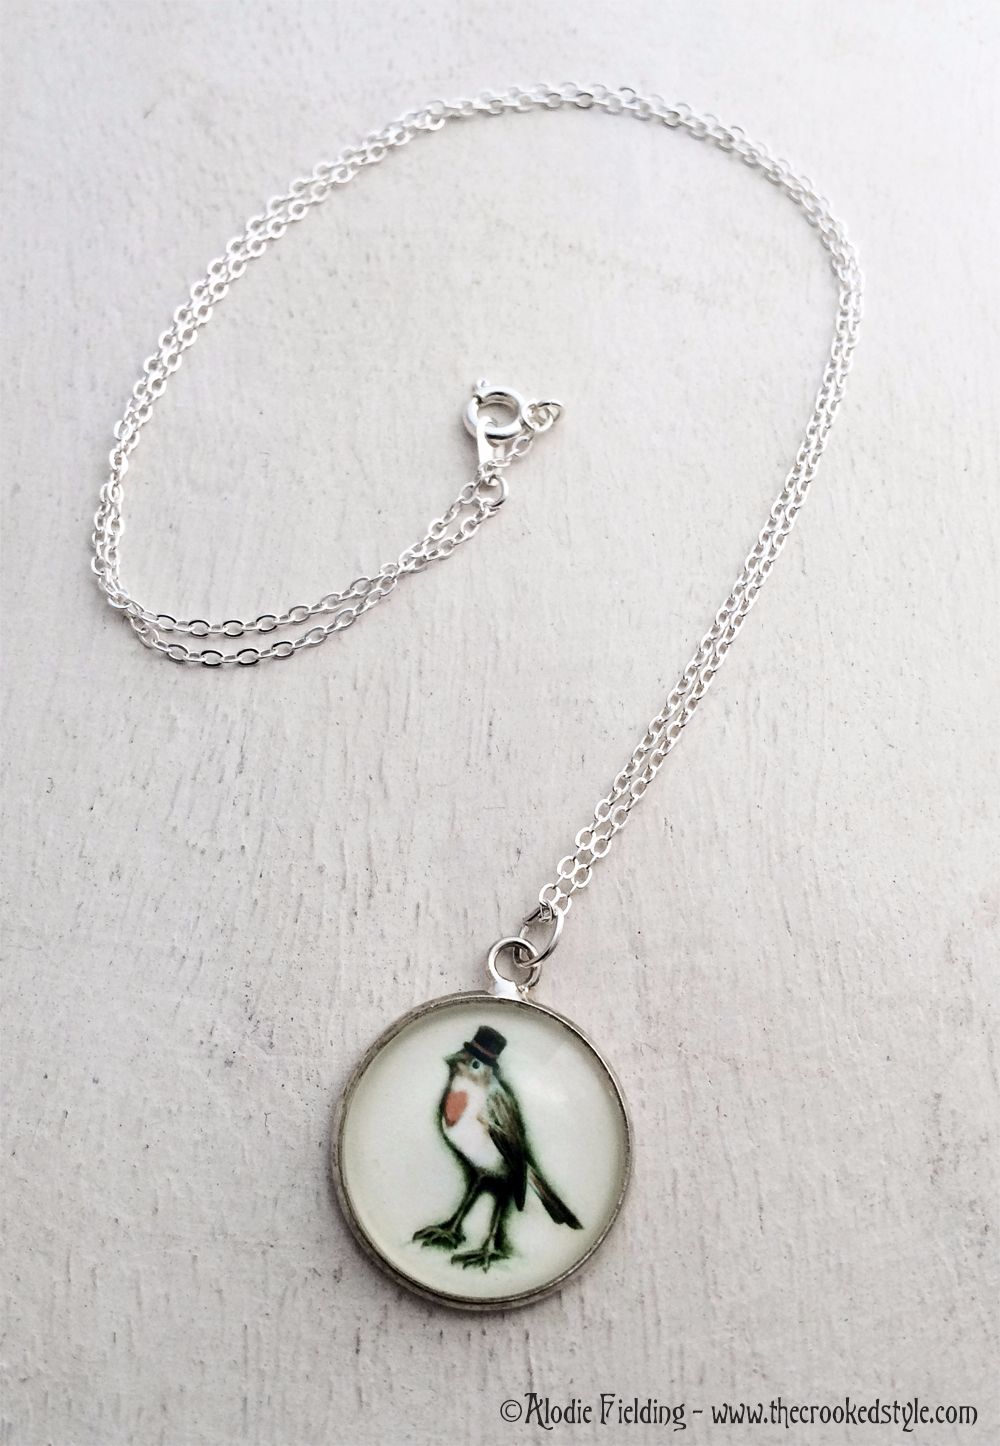 ROBIN IN A TOP HAT - 20mm SILVER PLATED PENDANT